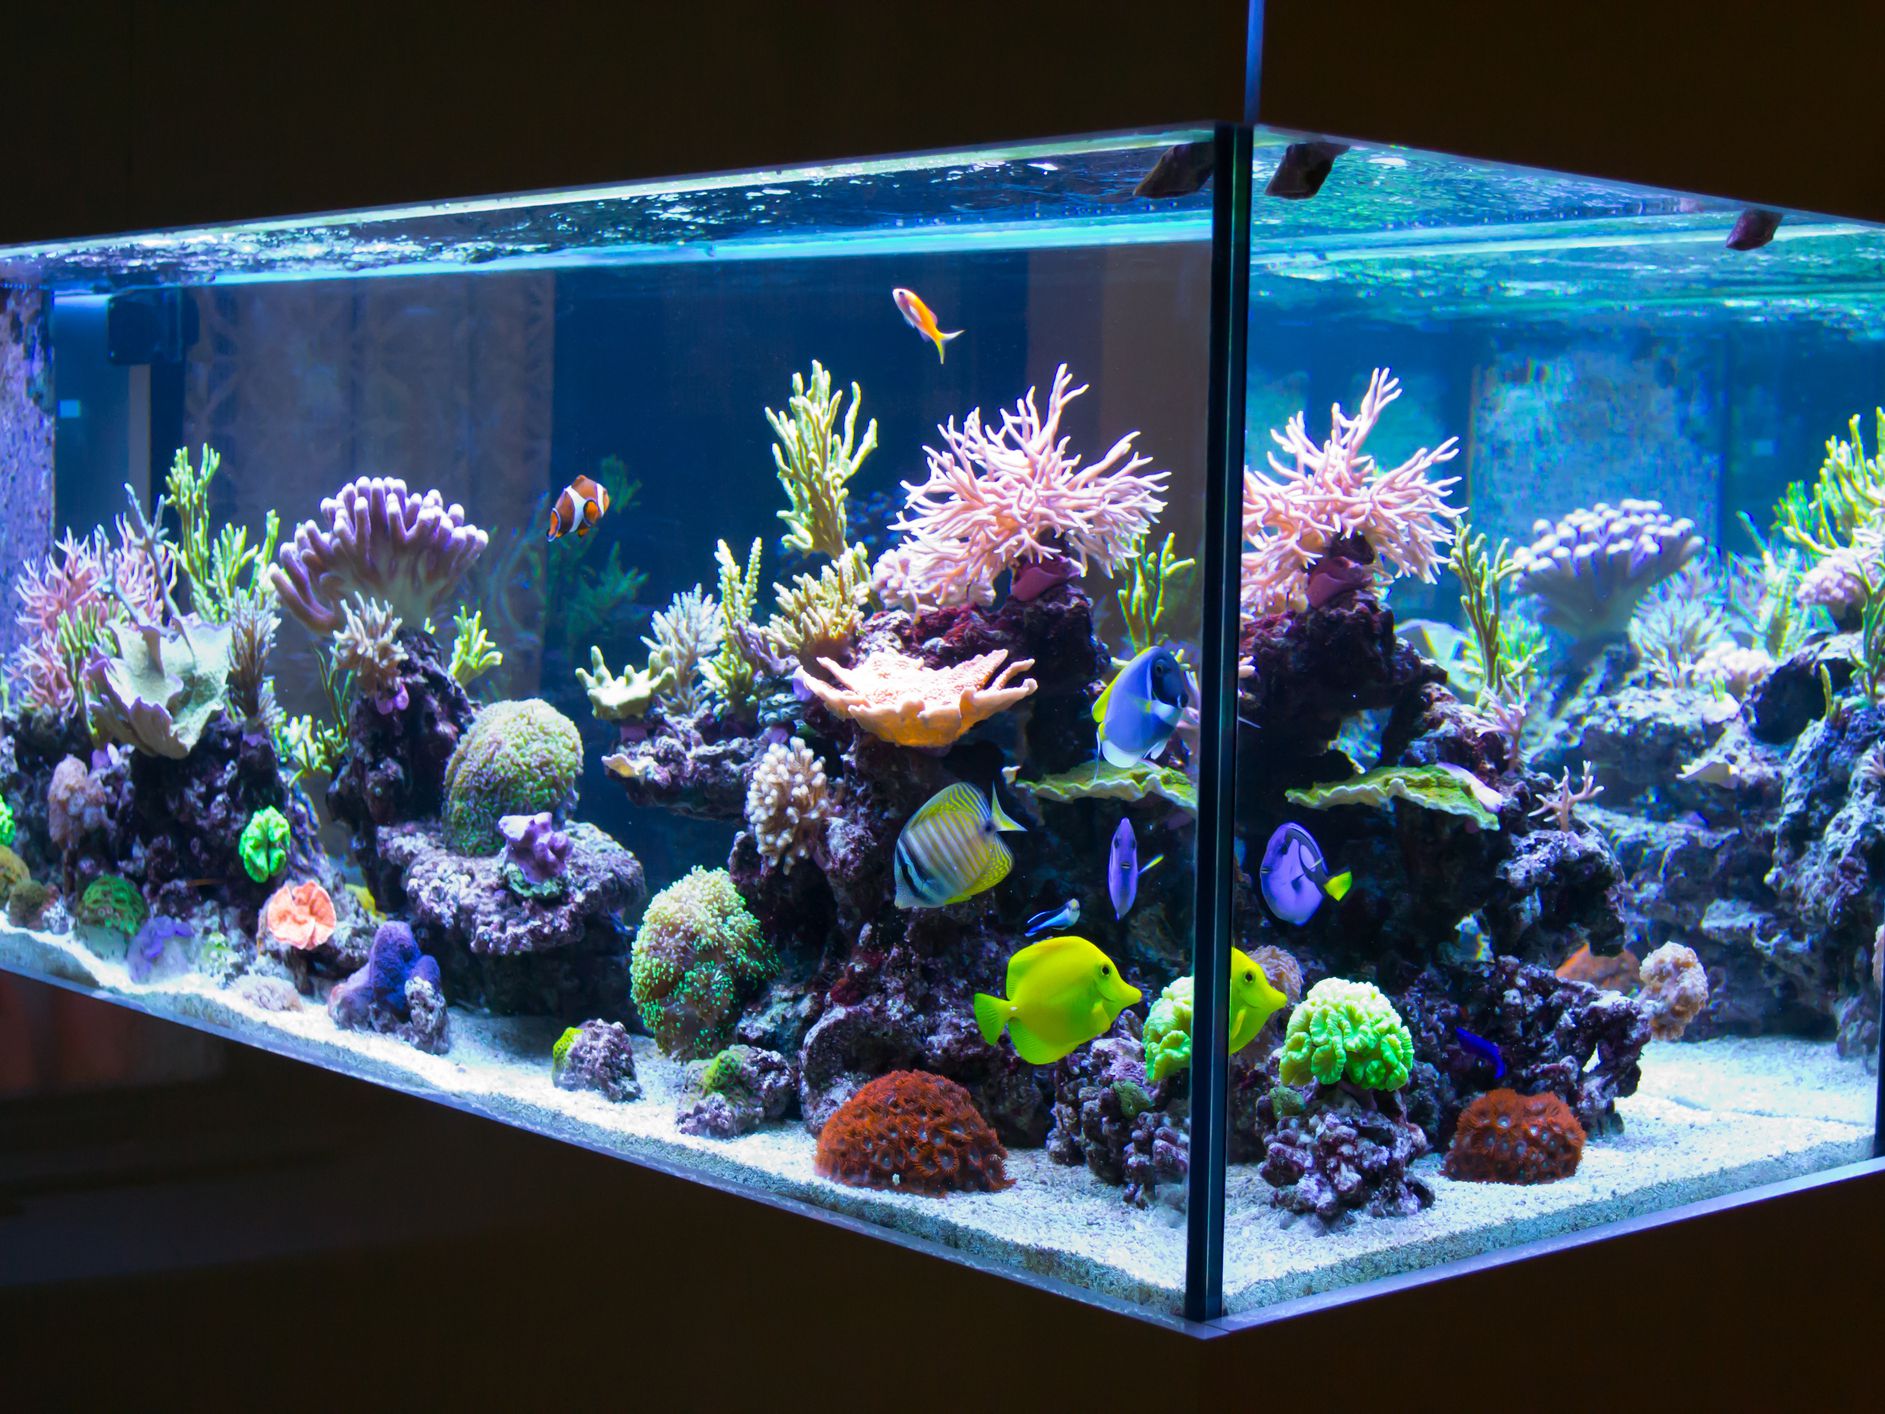 Points to remember when buying aquarium for keeping